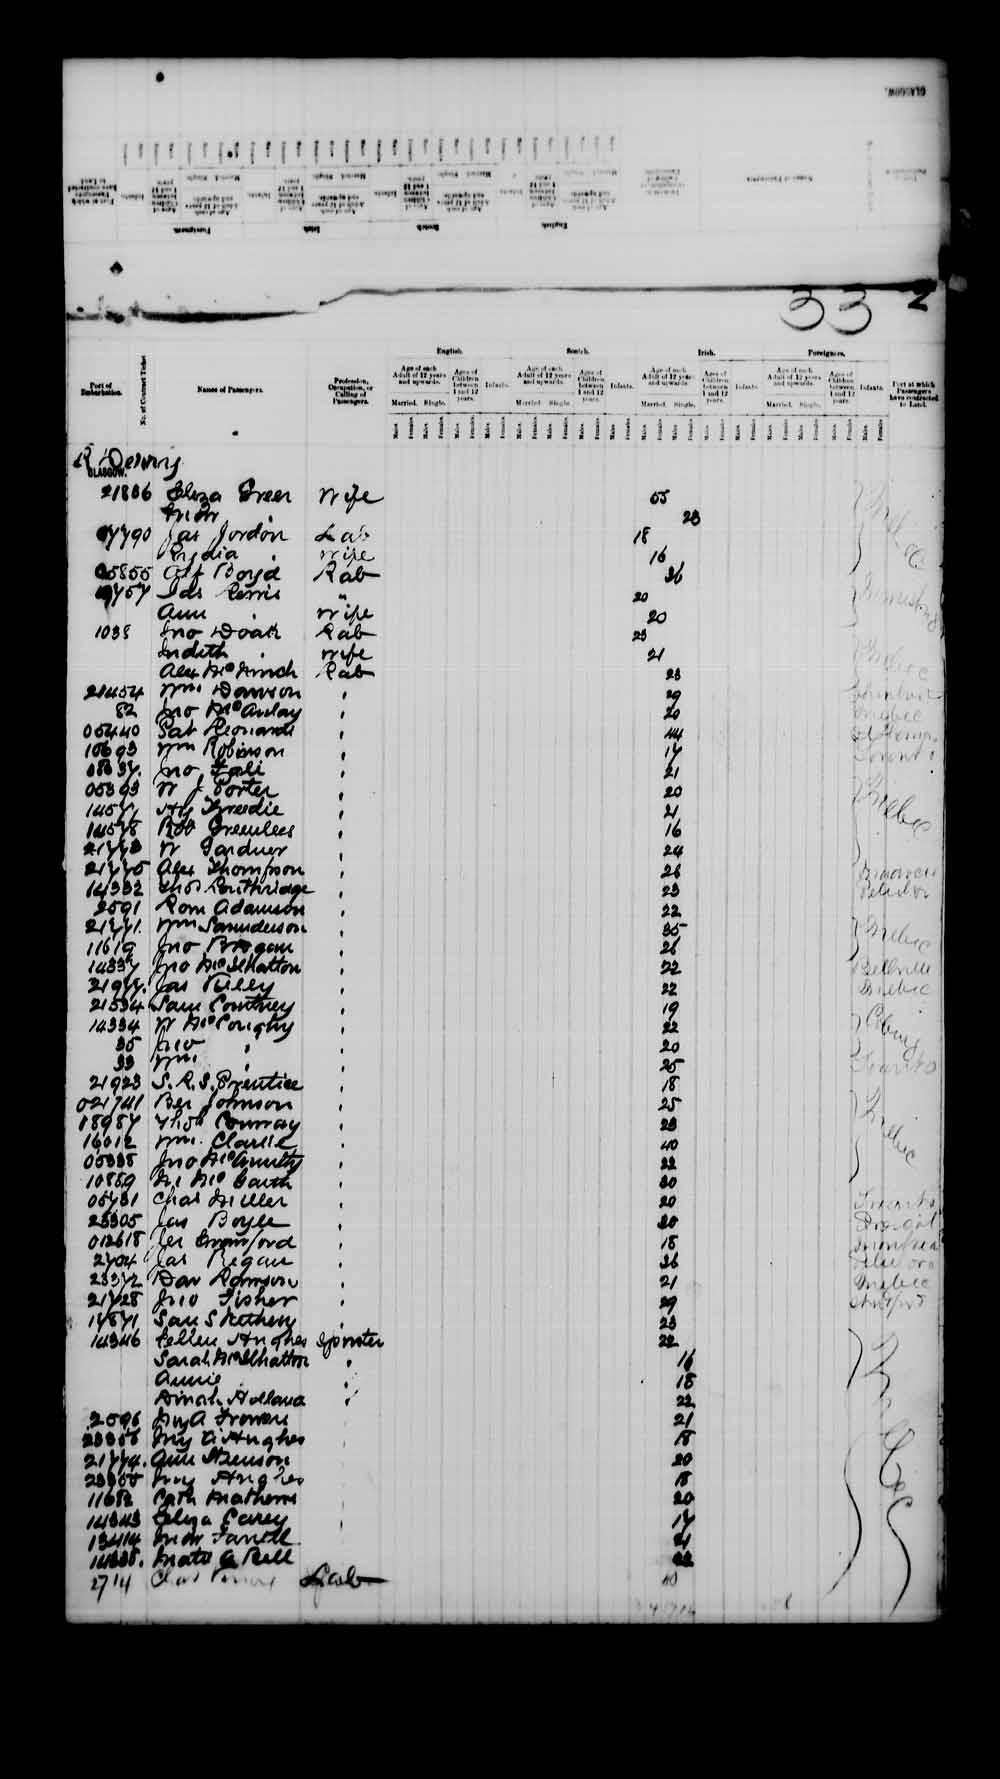 Digitized page of Passenger Lists for Image No.: e003543097